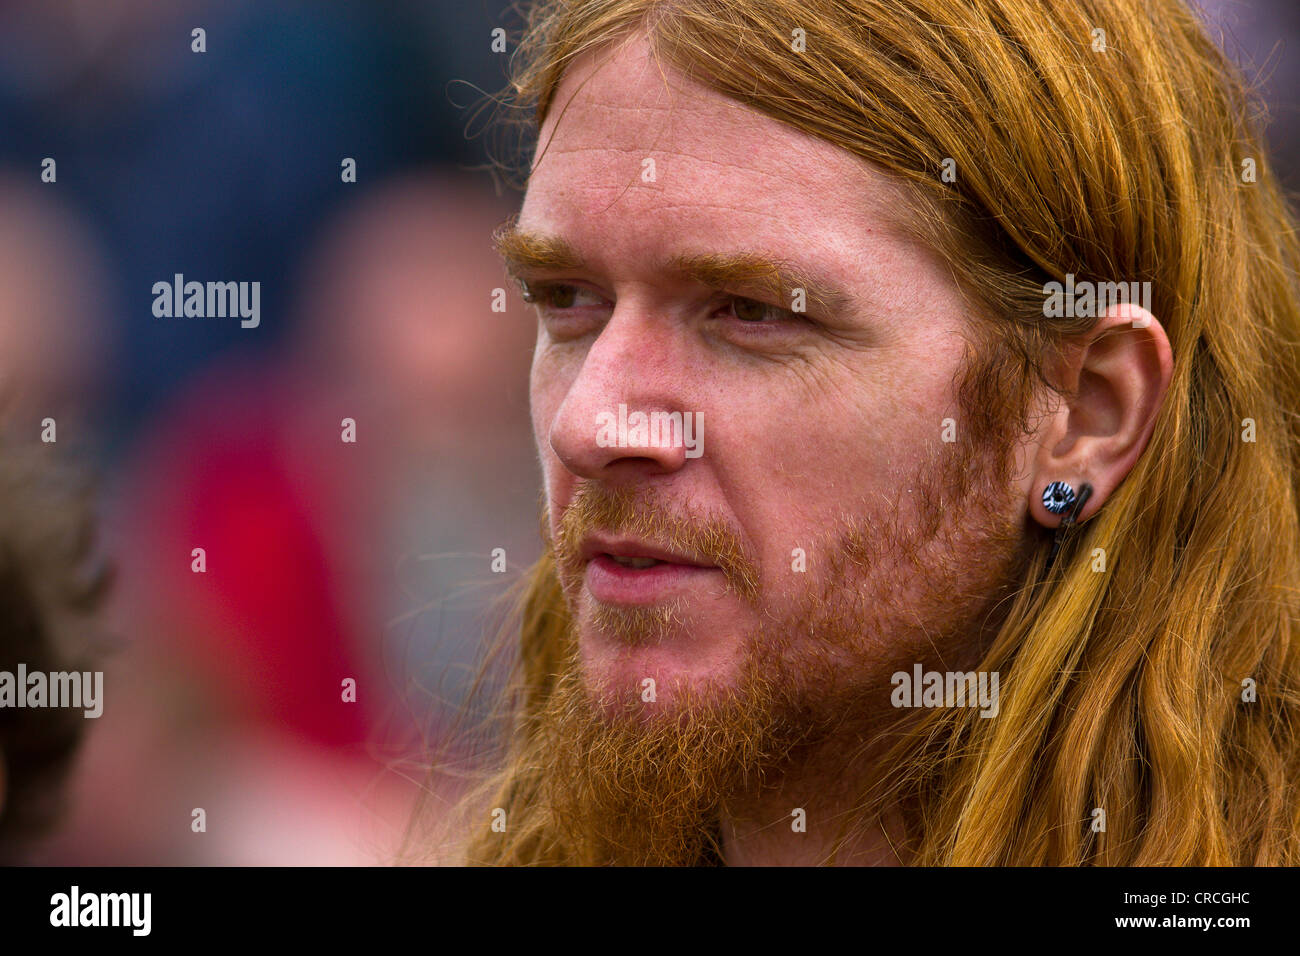 Young ginger male with long hair, beard and ear-ring Stock Photo - Alamy